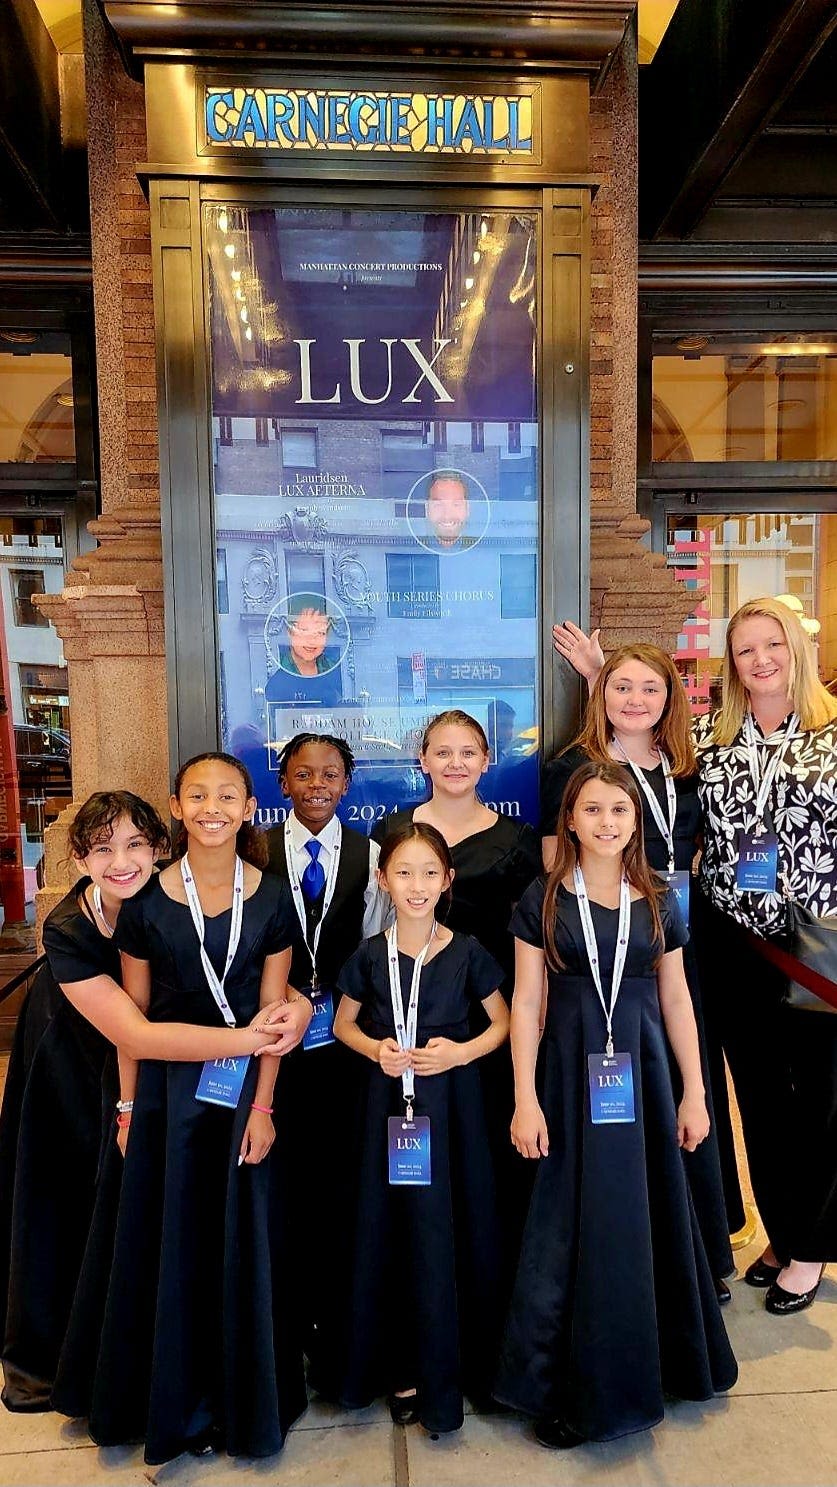 Wiles Elementary School chorus performs at Carnegie Hall in New York City